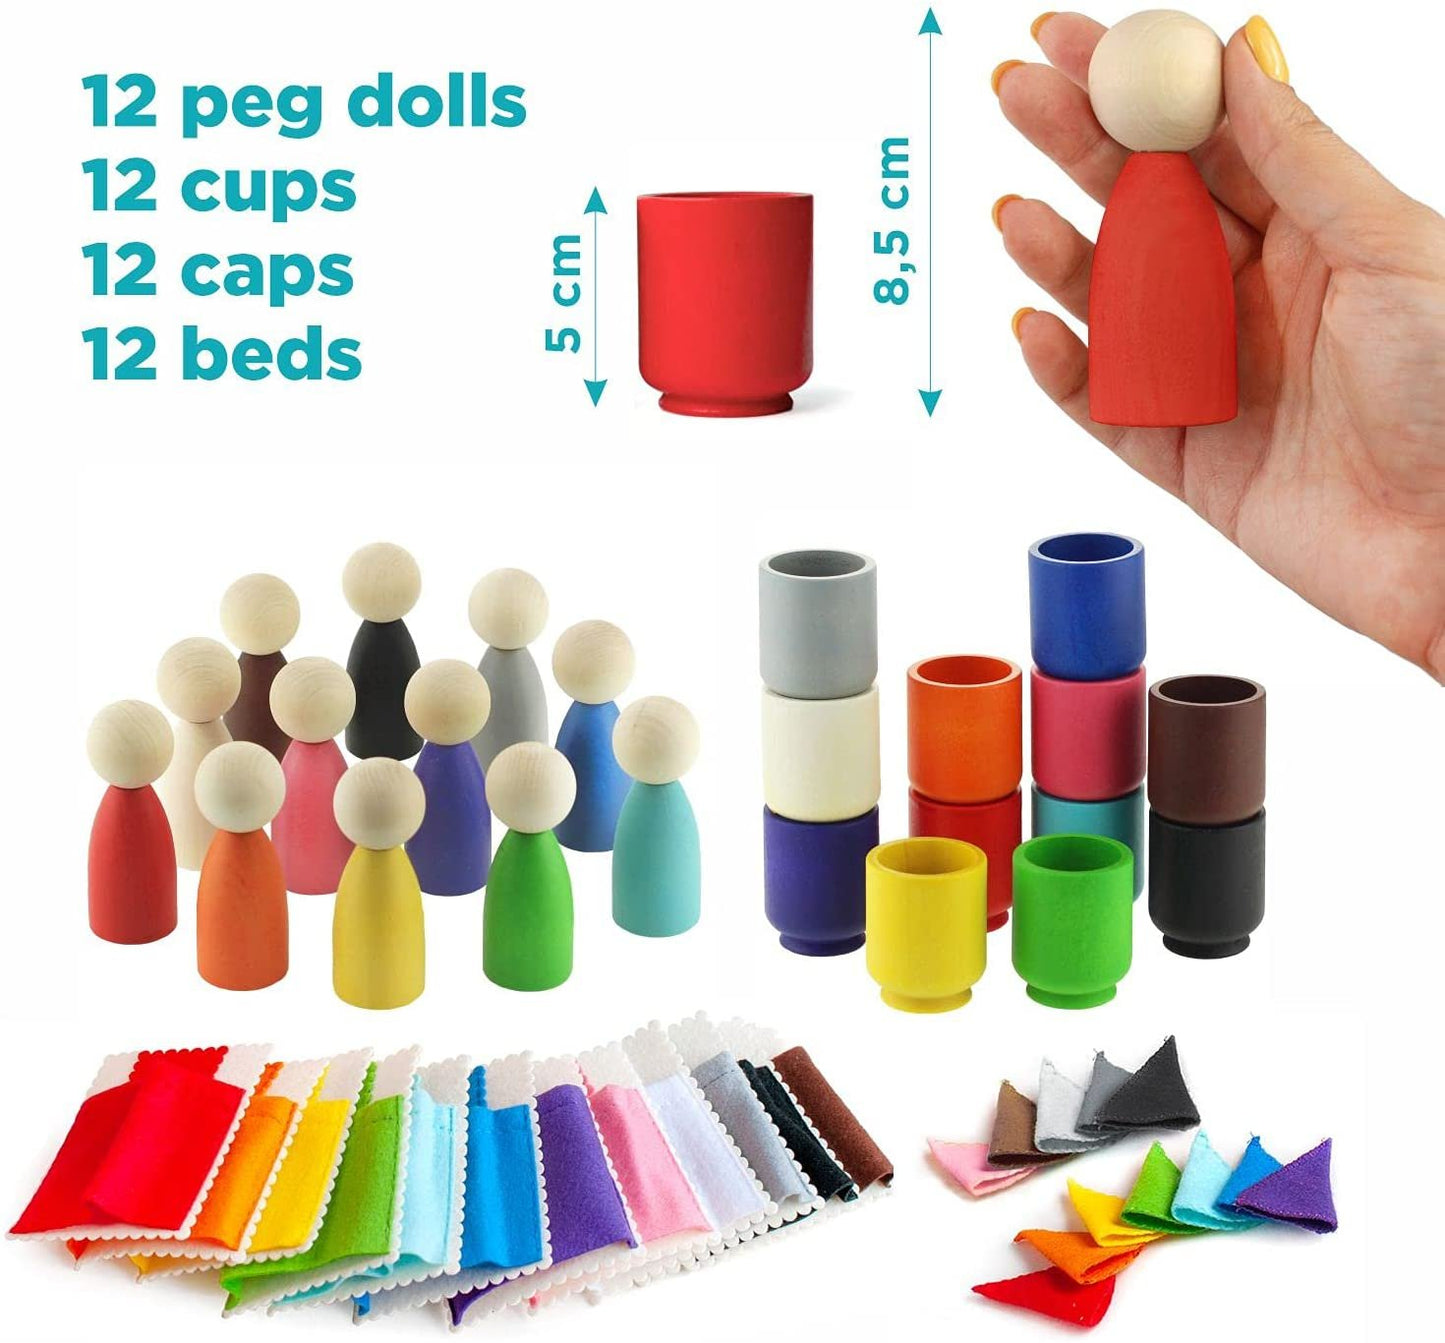 Ulanik Large Peg Dolls in Cups with Hats & Beds Toddler Montessori Toys for 3+ Wooden Waldorf Dolls for Color Sorting & Counting